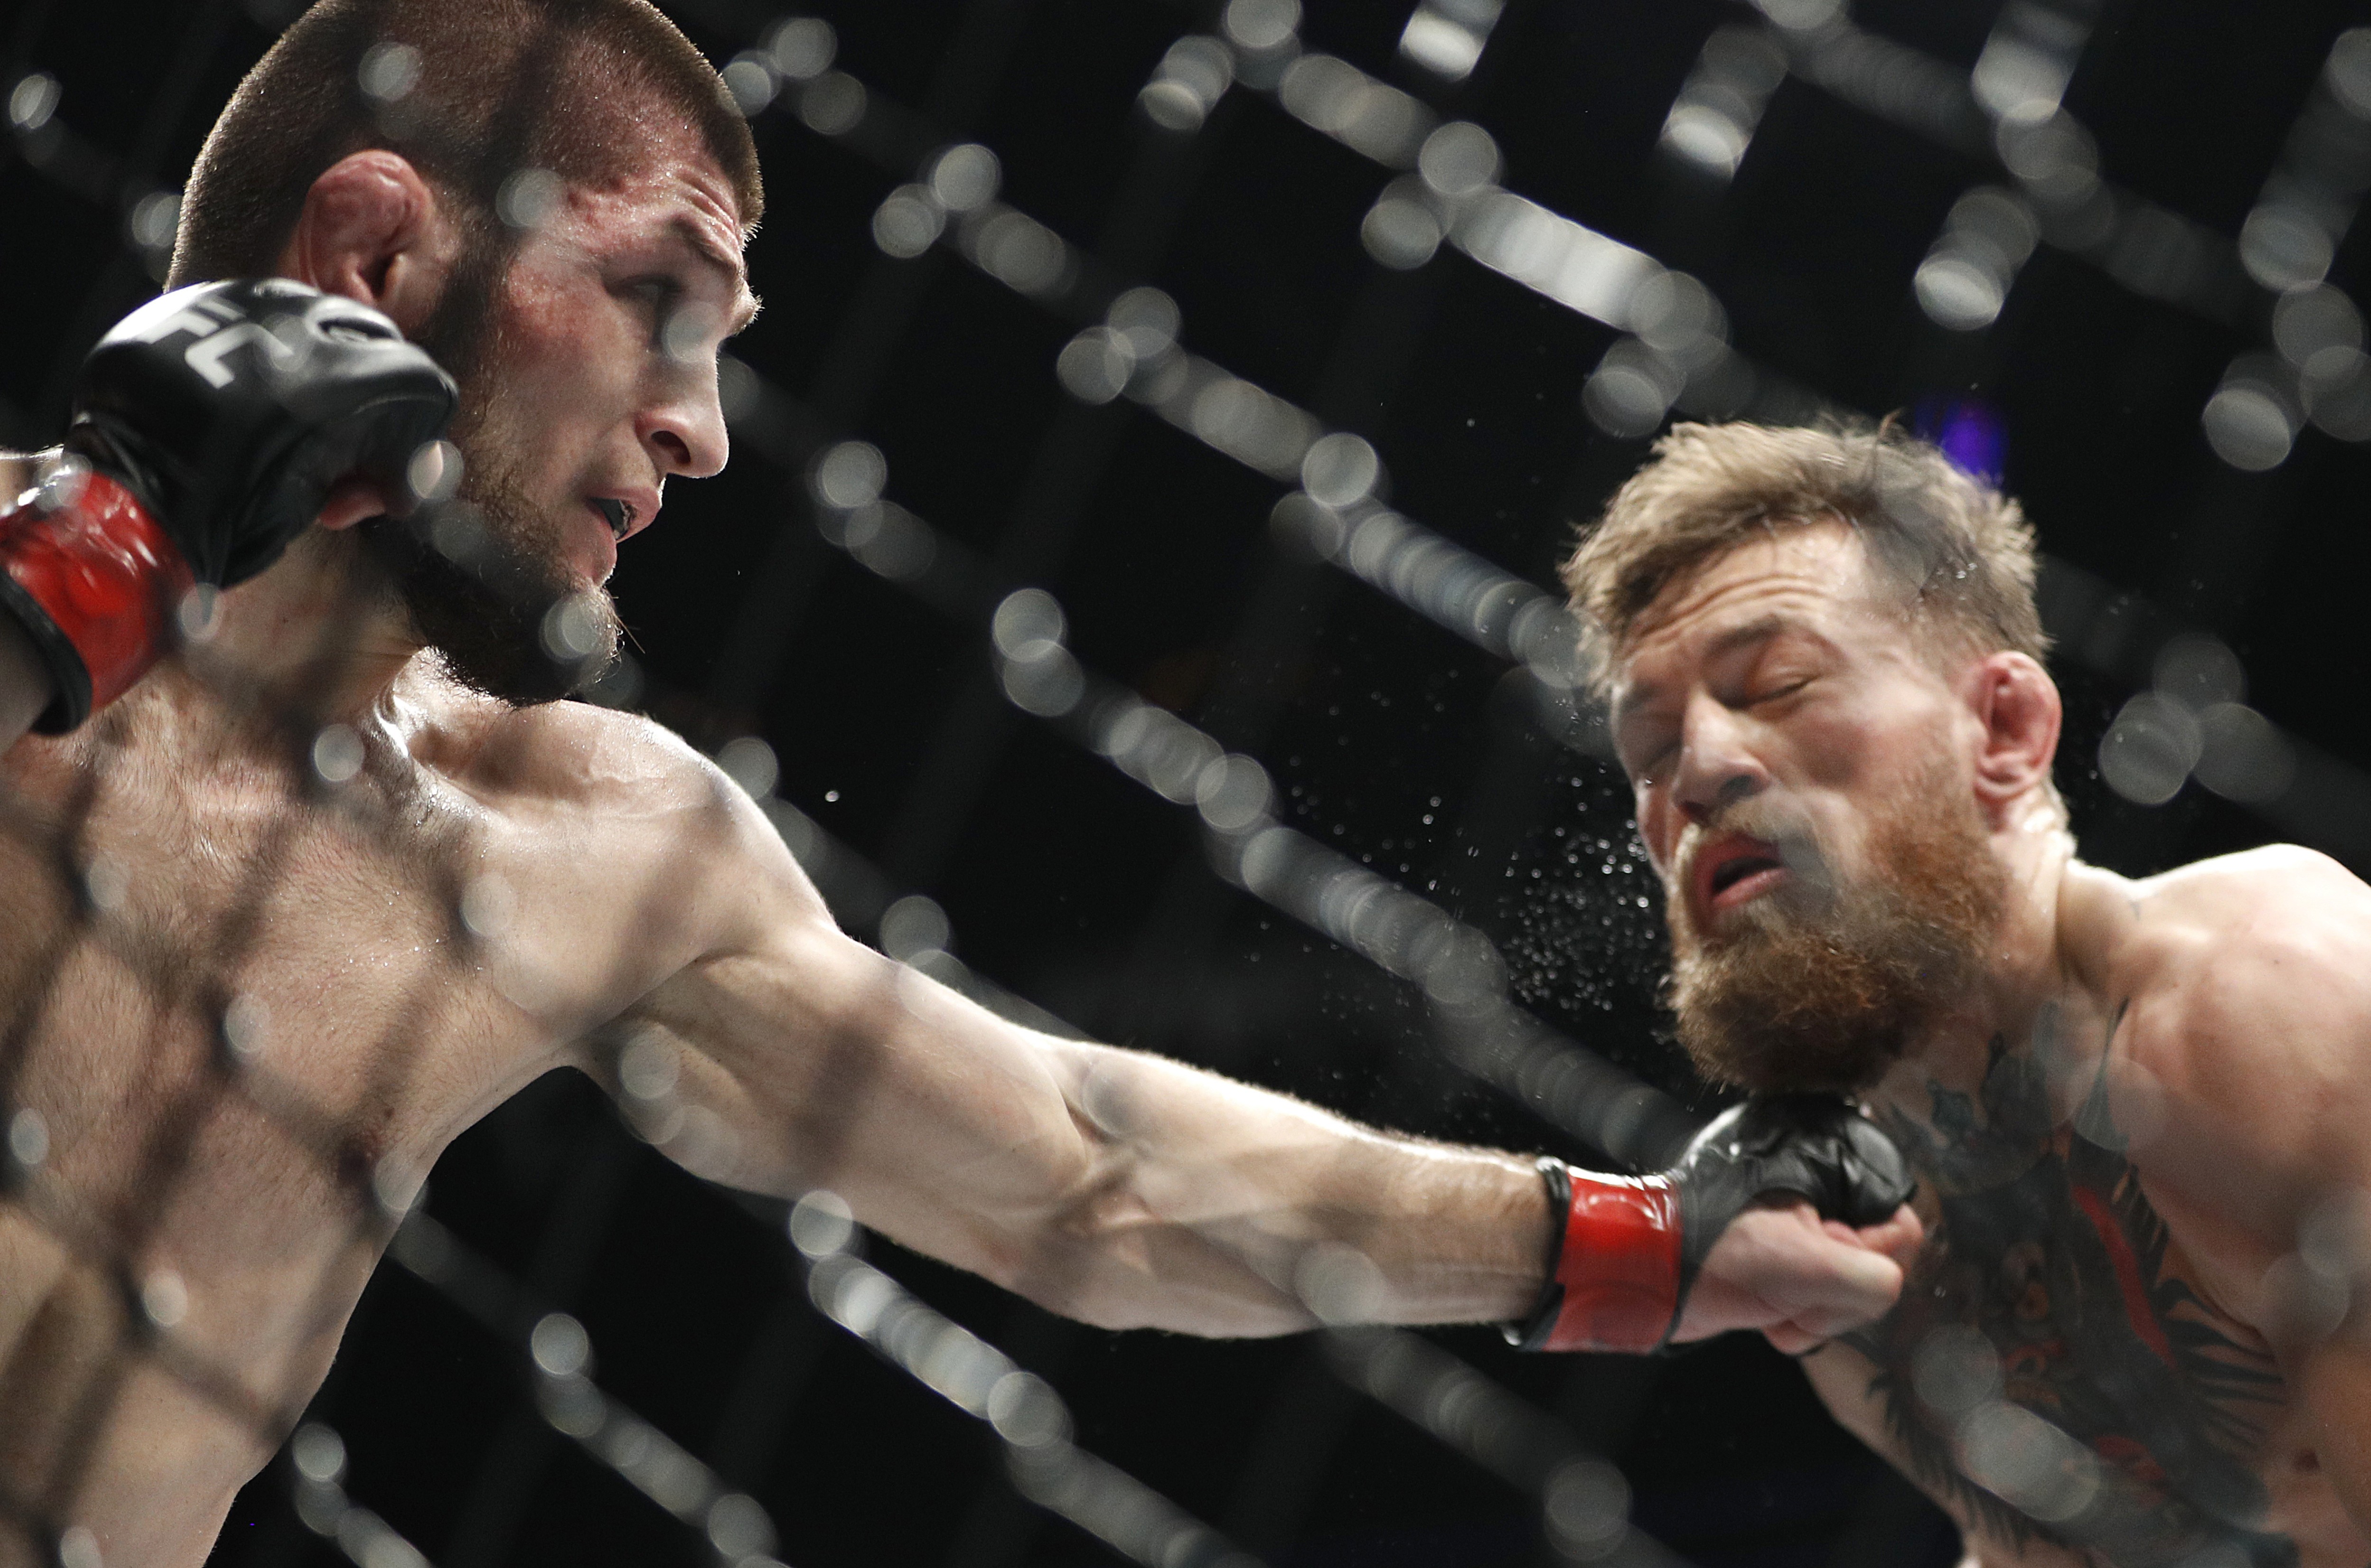 Khabib Nurmagomedov, left, punches Conor McGregor during a lightweight title mixed martial arts bout at UFC 229 in Las Vegas. Photo: AP Photo